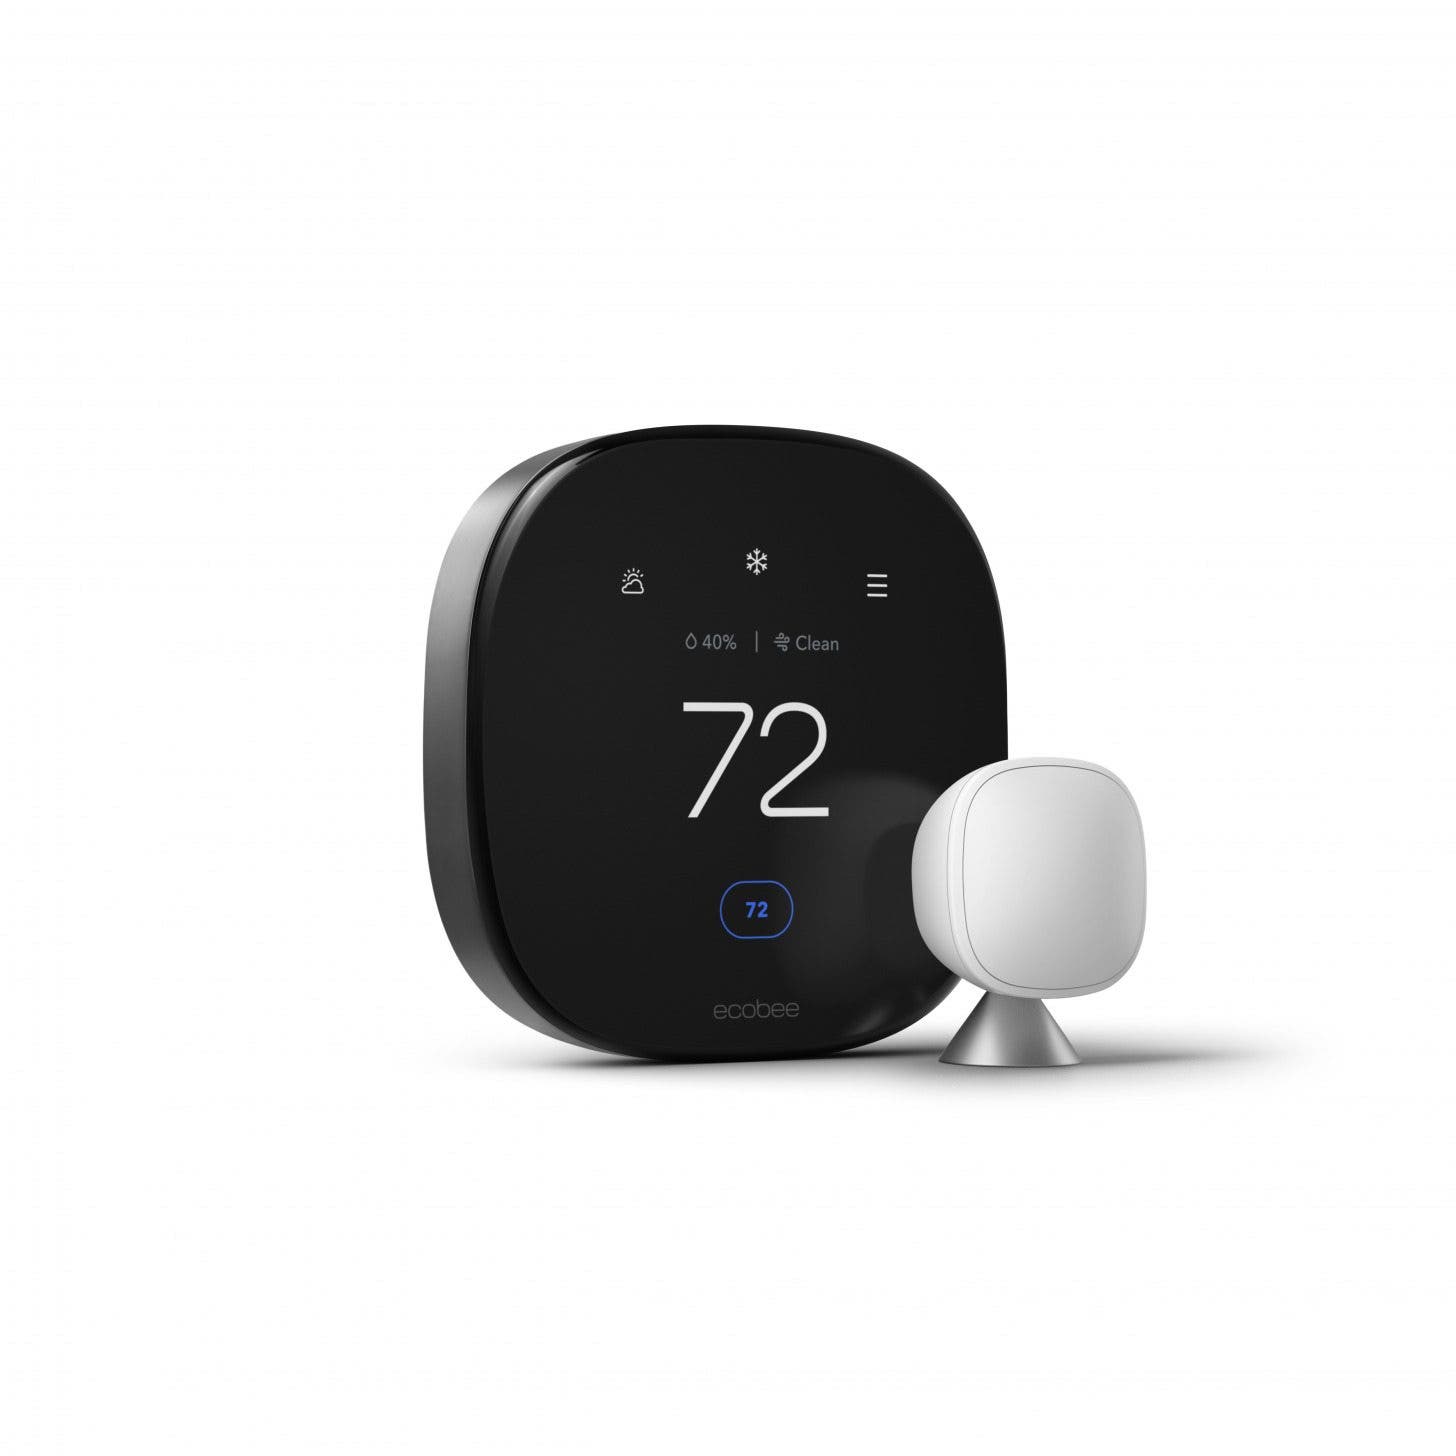 https://www.iphonelife.com/sites/iphonelife.com/files/styles/full_width_wide_2x/public/smart_thermostat_premium_product19.jpg?itok=x2ZDm28o